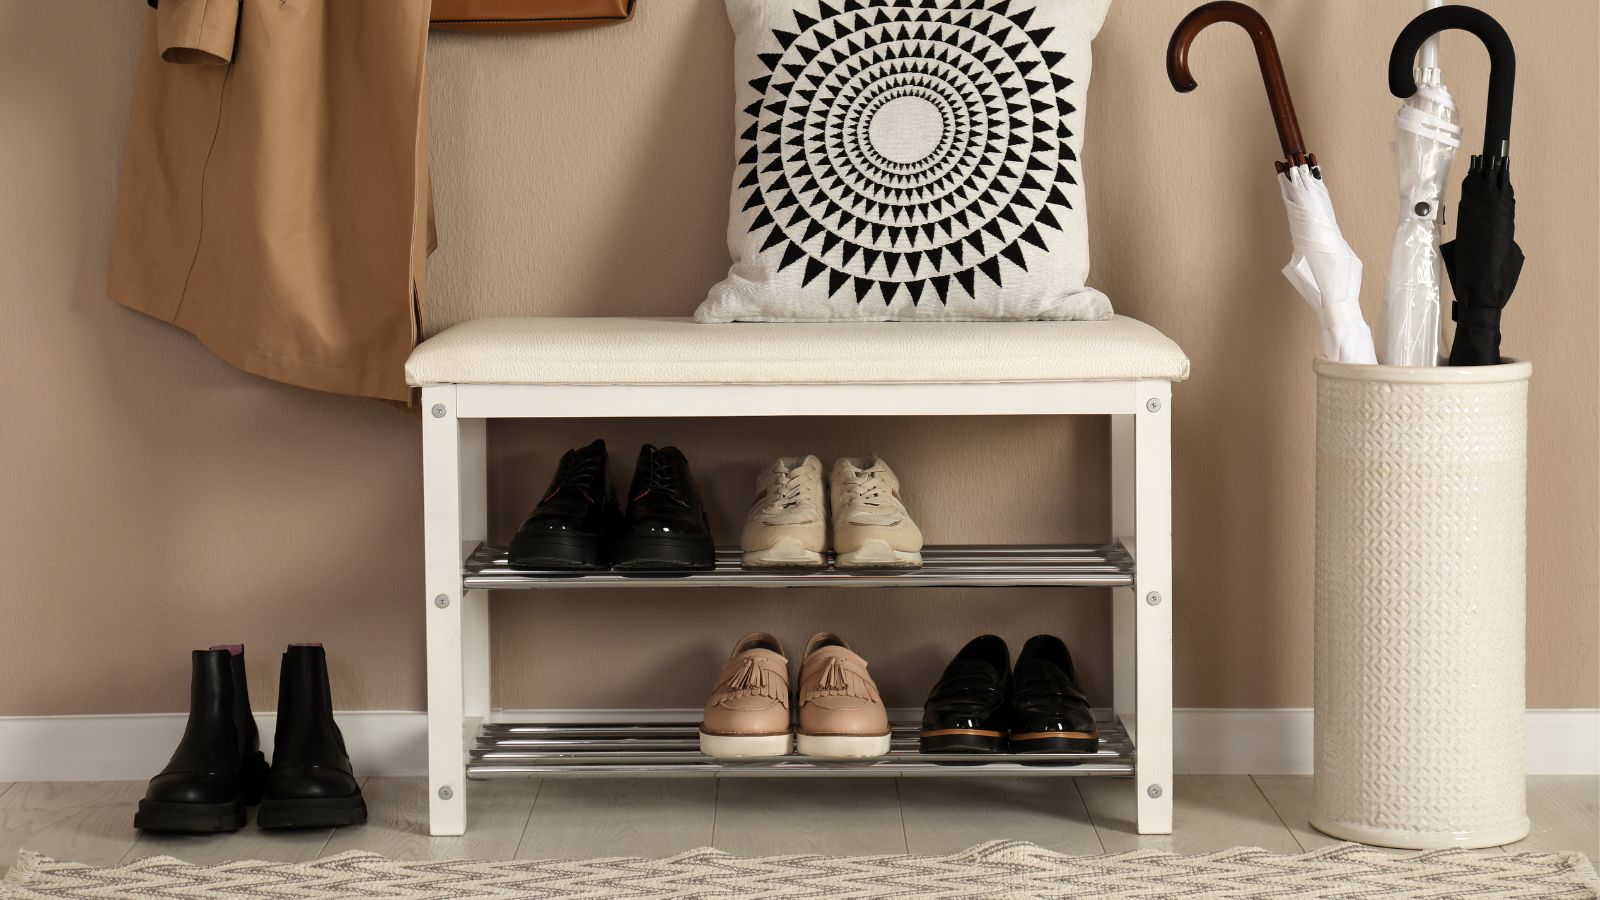 8 Shoe Storage Ideas: How to Organize Shoes in a Small Space